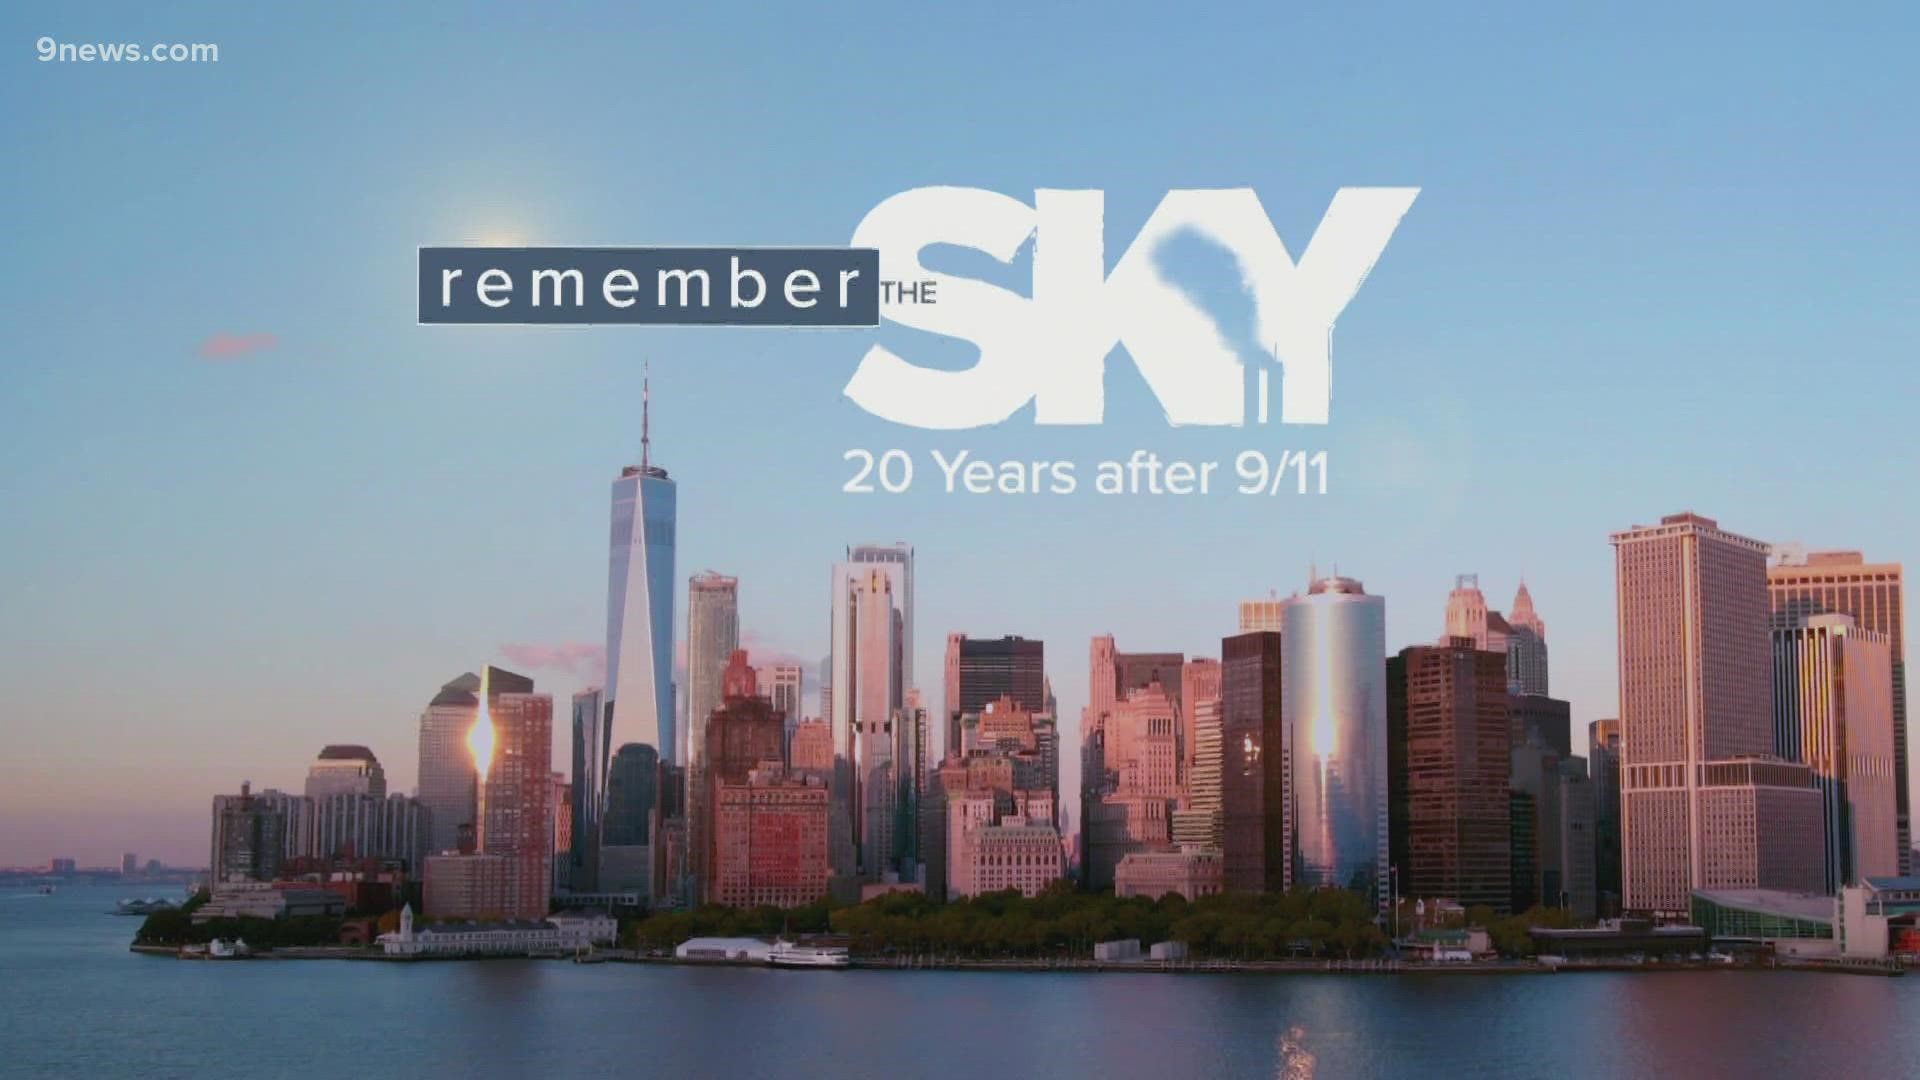 Gary Shapiro and photojournalist Manny Sotelo look back at the day the world changed. They take you to the 9/11 Memorial & Museum and remember some of the victims.